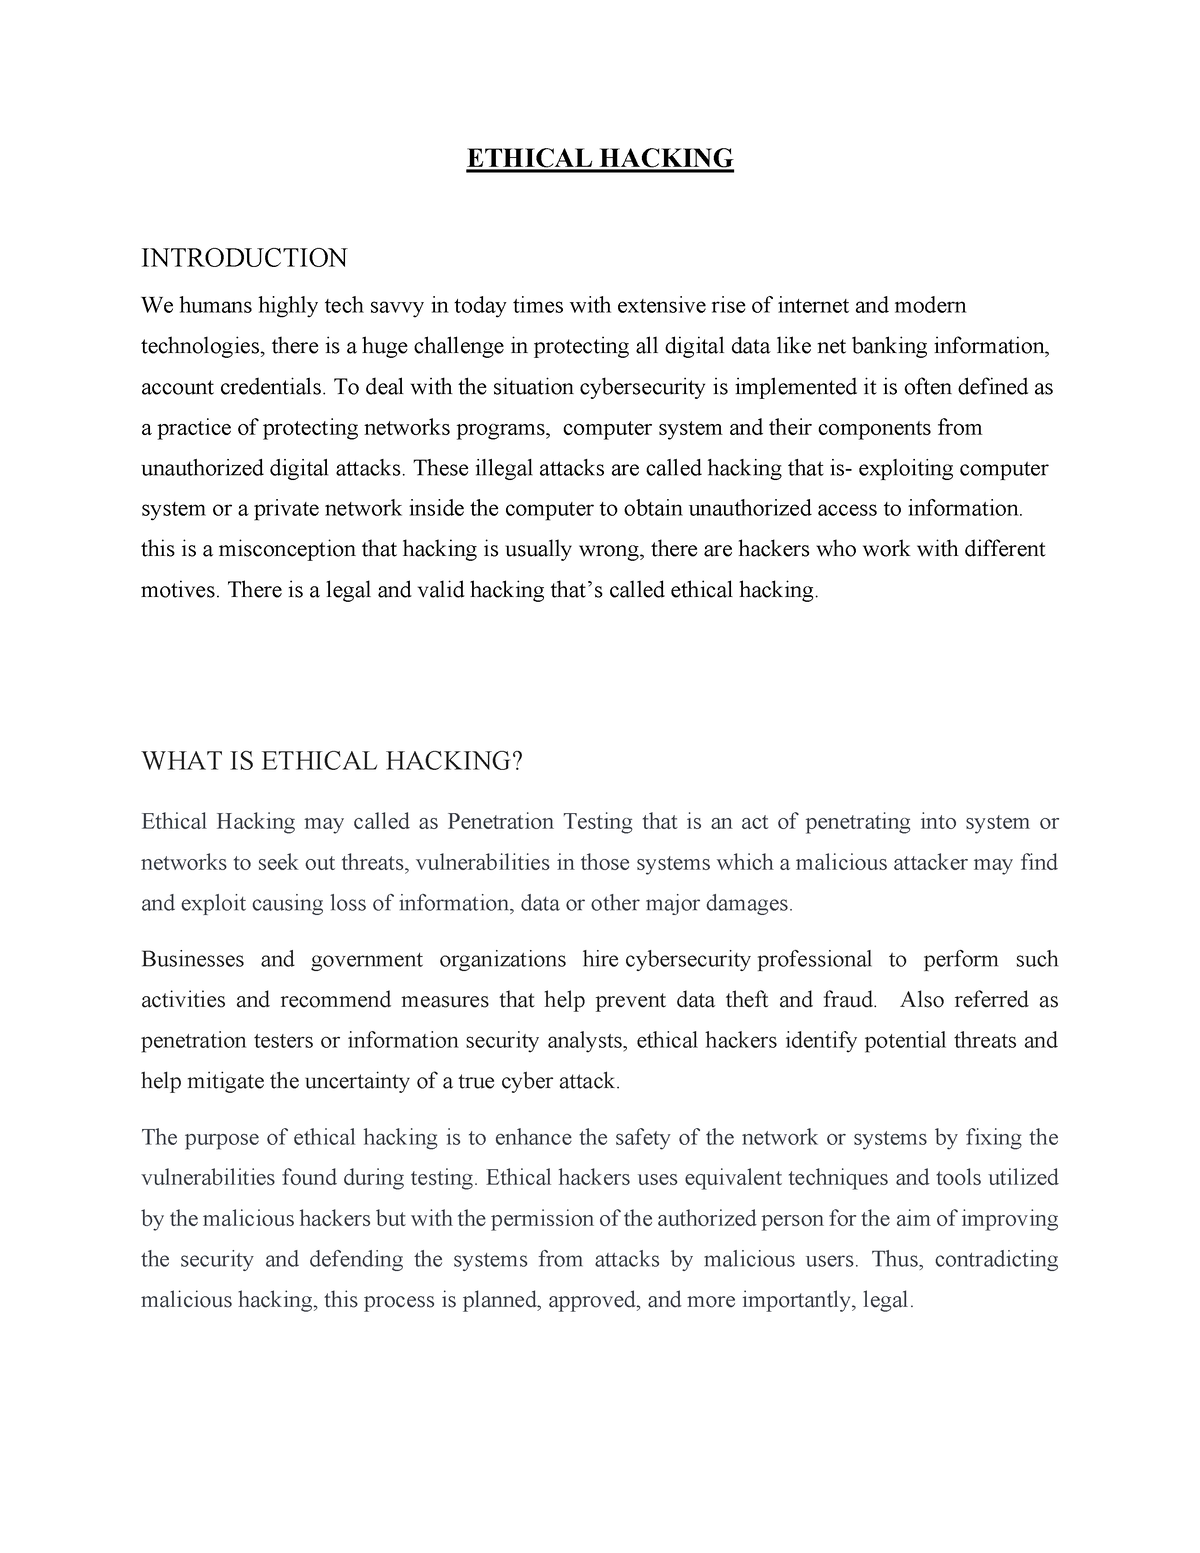 essay of ethical hacking